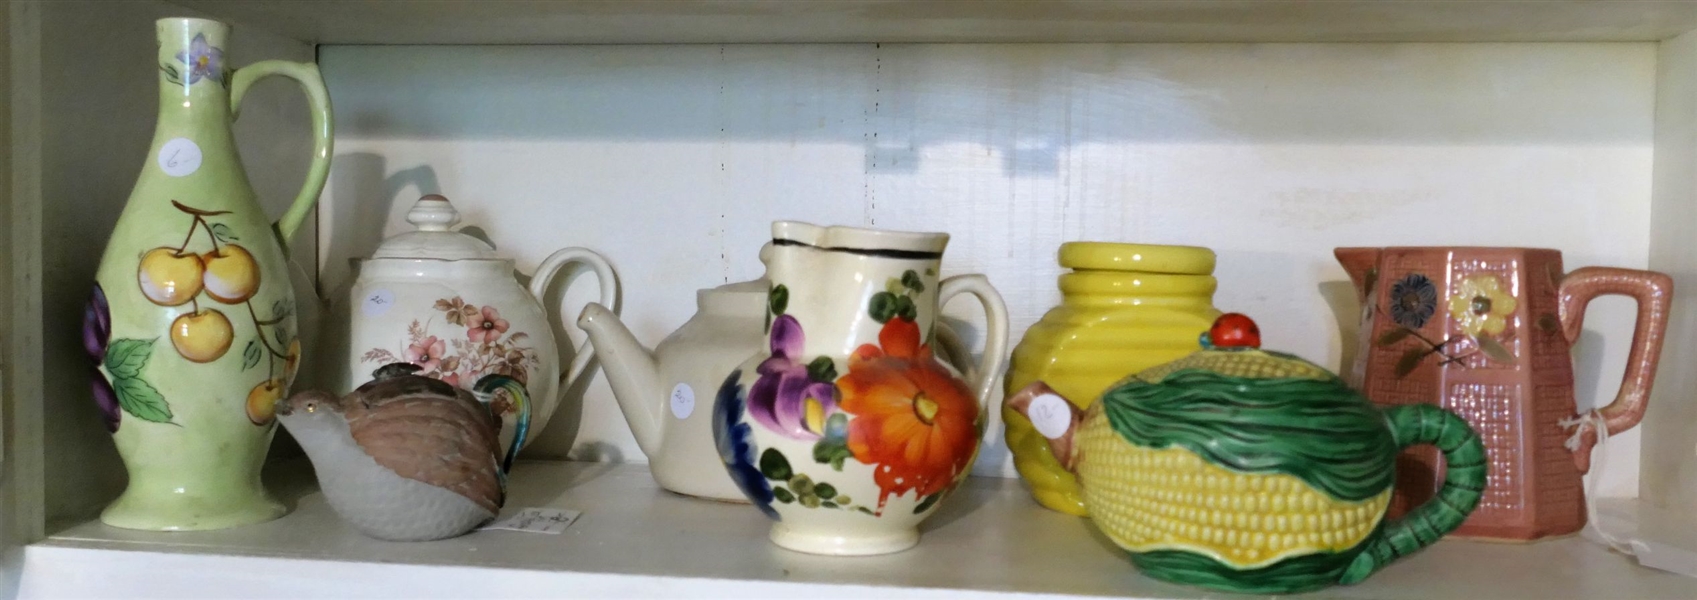 Shelf Lot of Pitchers - Corn with Lady Bug, Alco Yellow Jar, Pink Made in Japan Pitcher, 